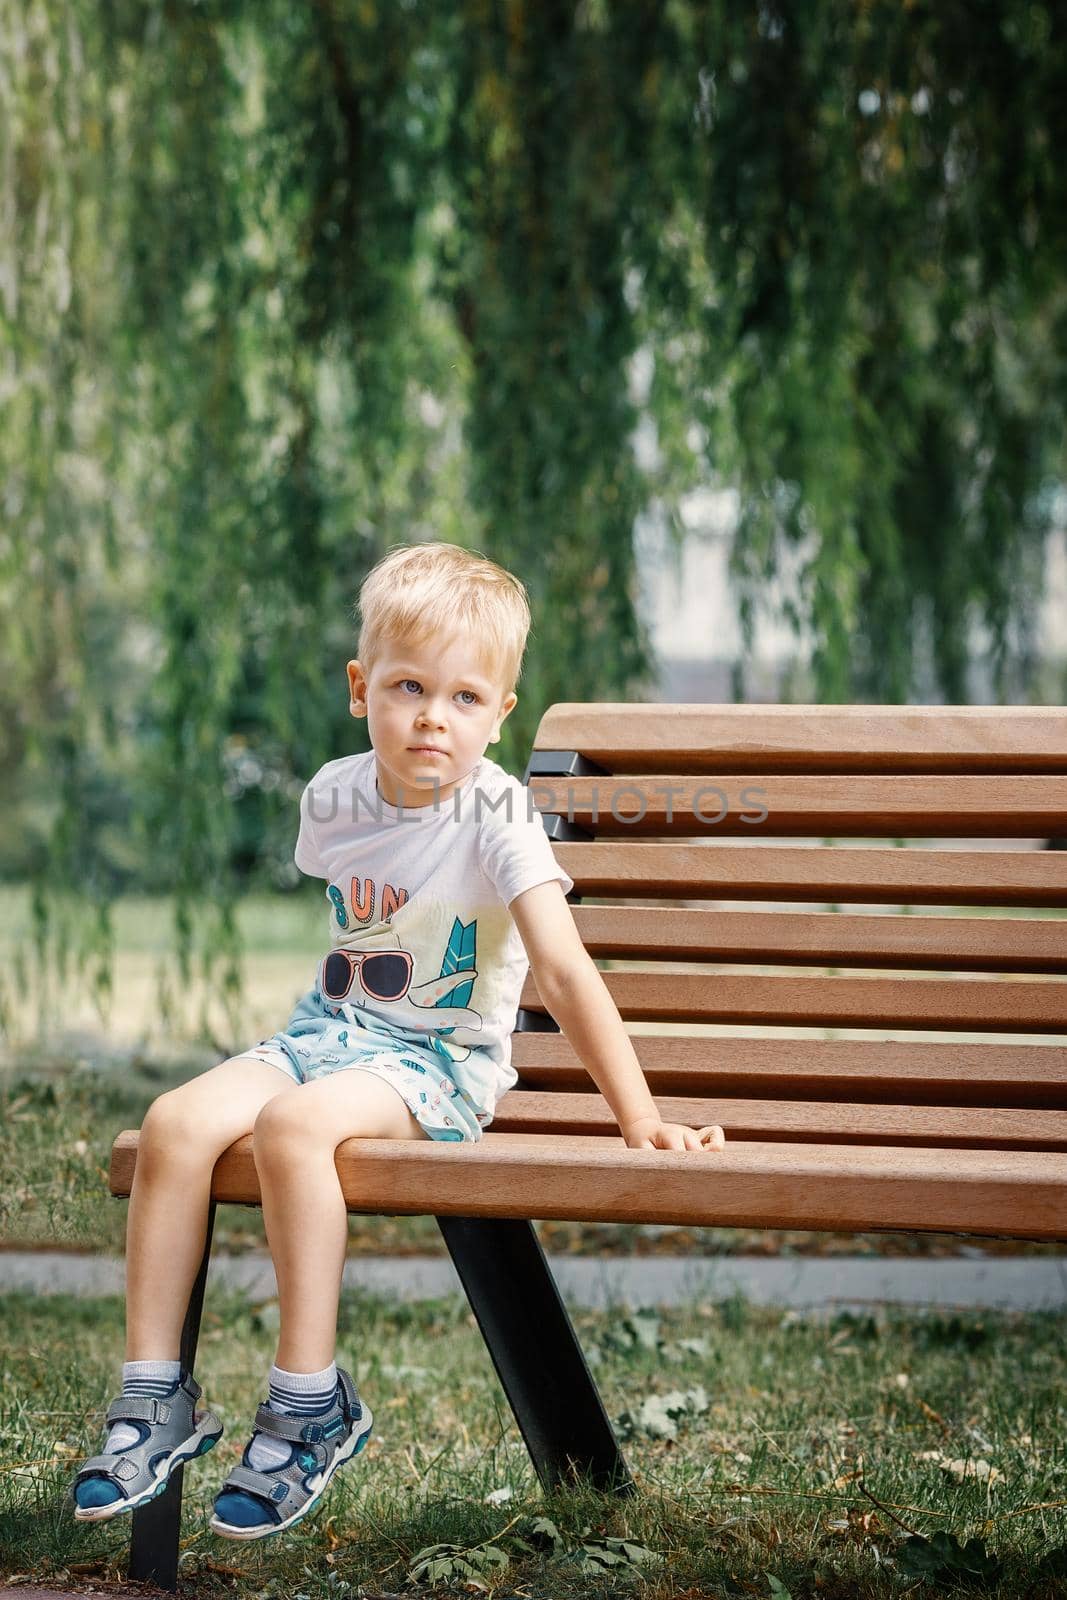 Child portrait sitting on a bench in park, white haired boy 3 years old. by Lincikas